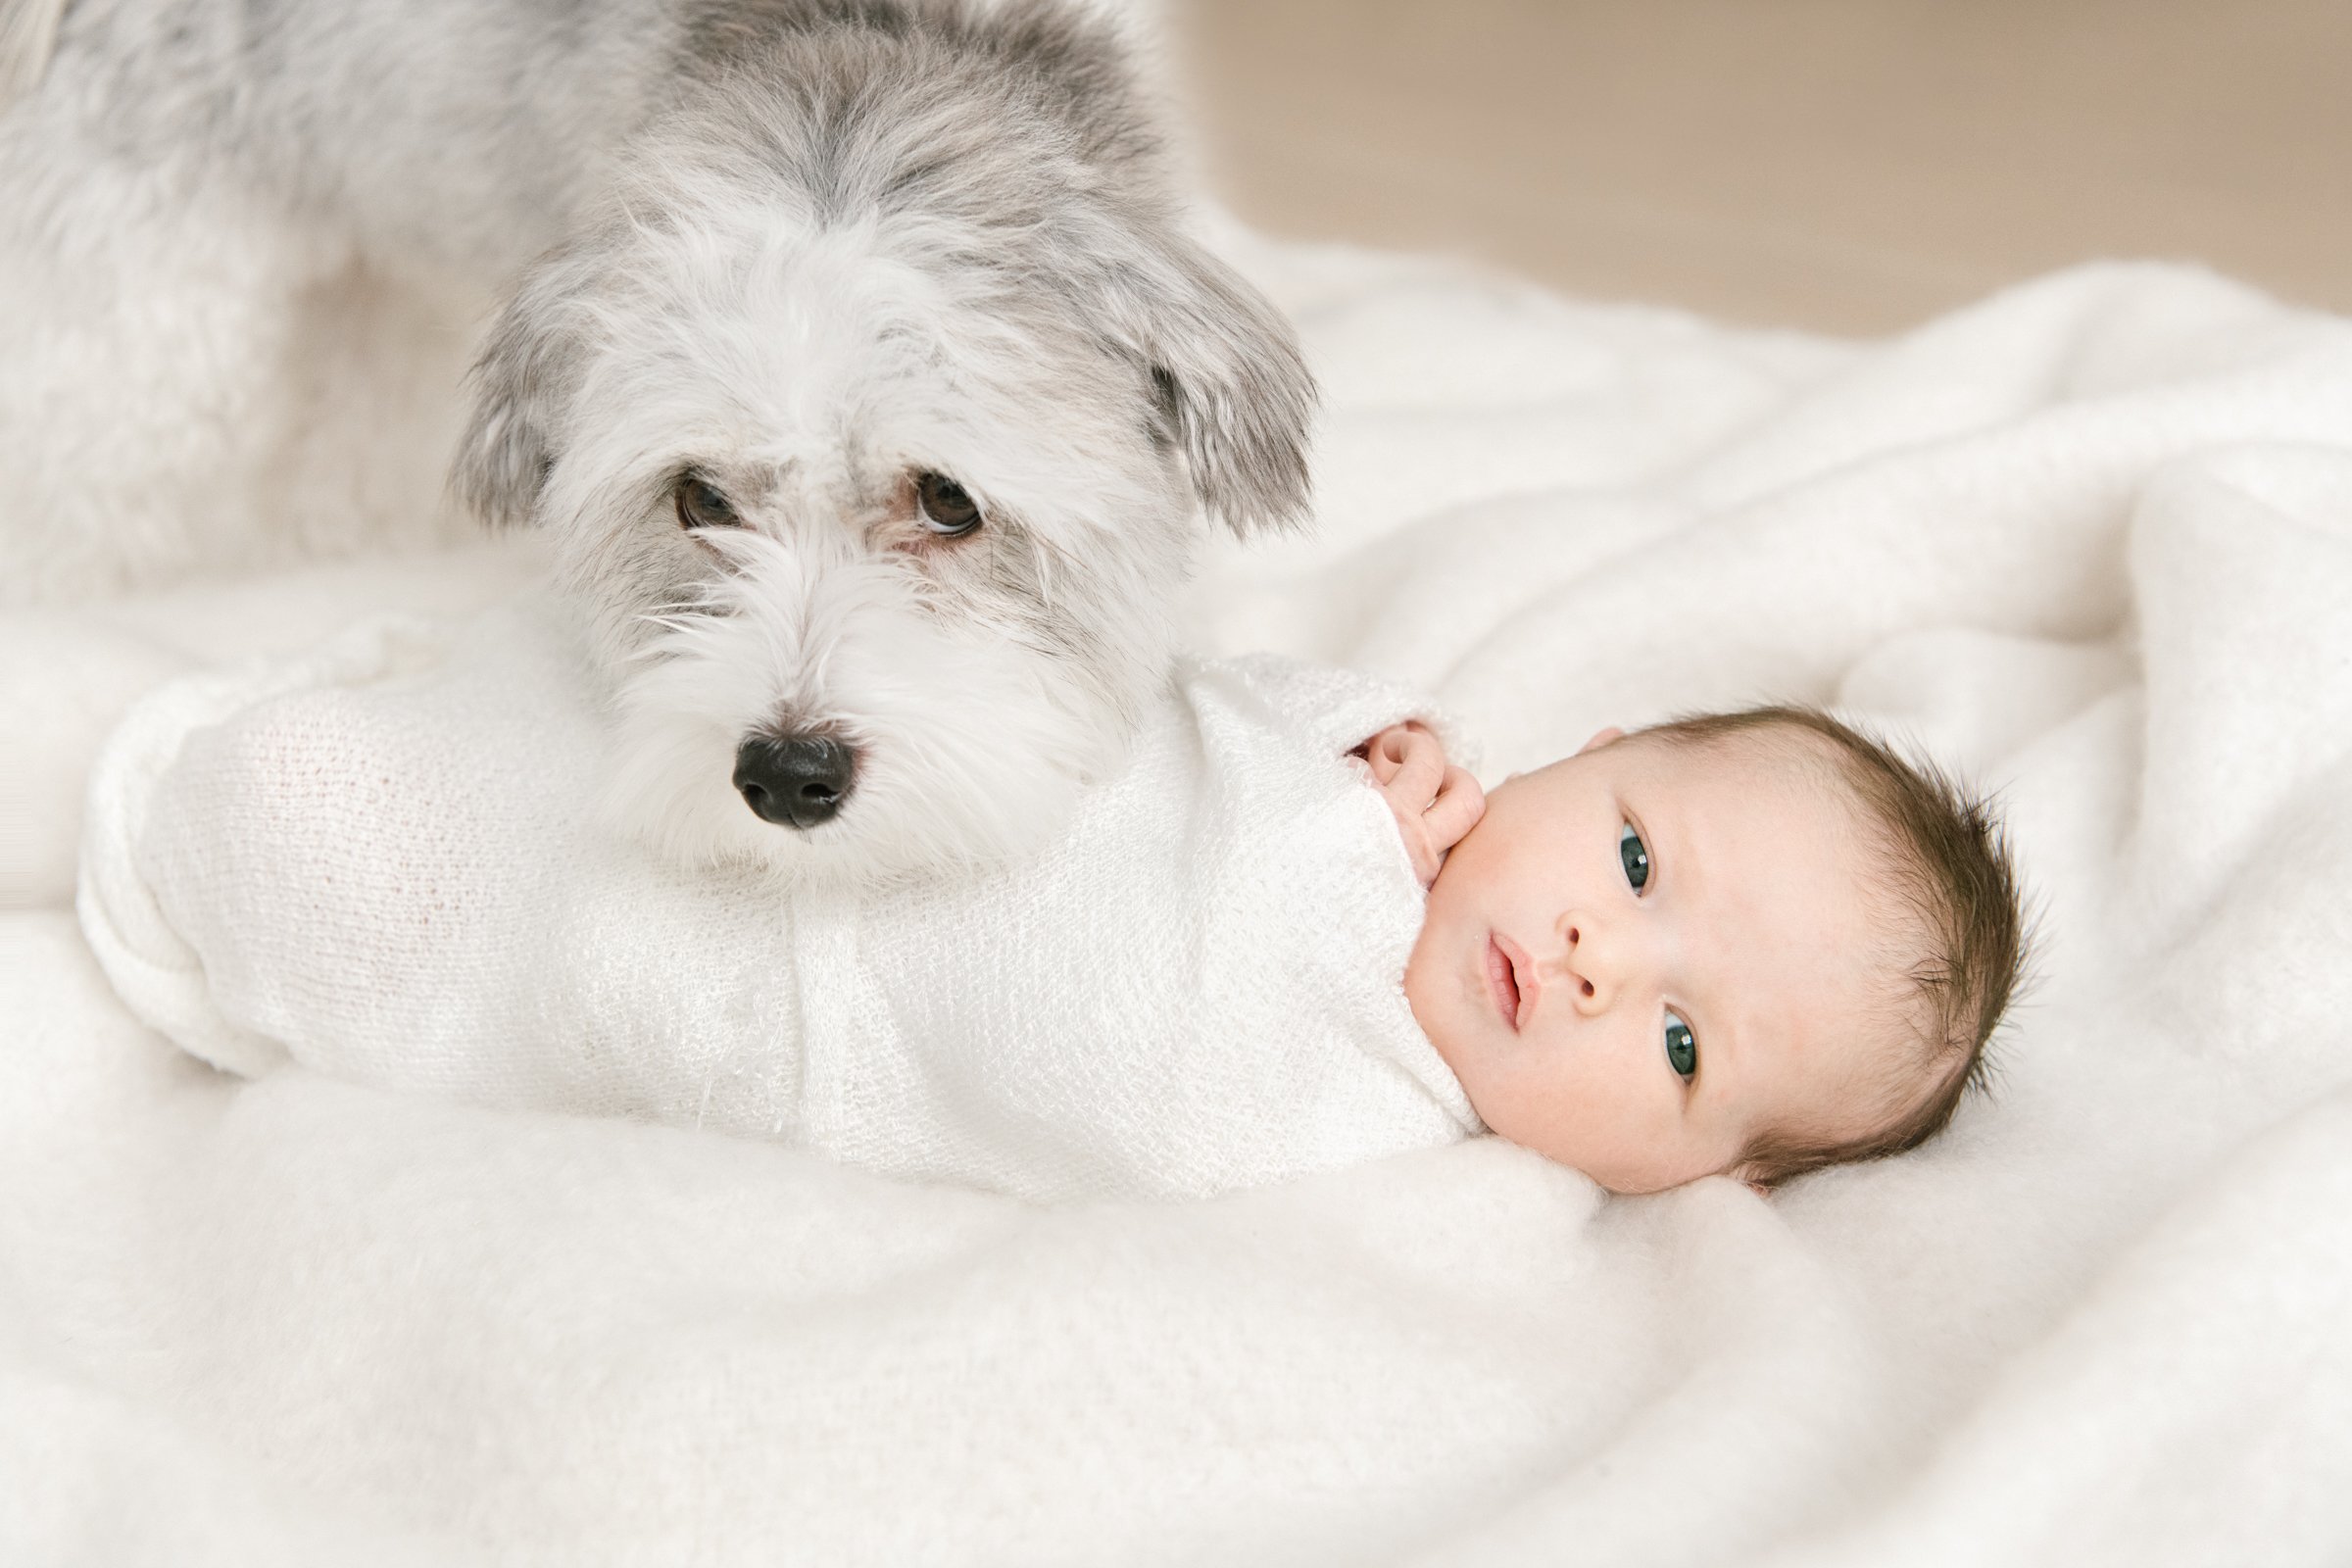  In a home in Hoboken, New Jersey Nicole Hawkins Photography captures a baby girl with her dog on a white blanket. dog and baby pictures doggie with baby girl white plush baby blankets newborn pose ideas New Jersey newborn sessions #nicolehawkinsphot